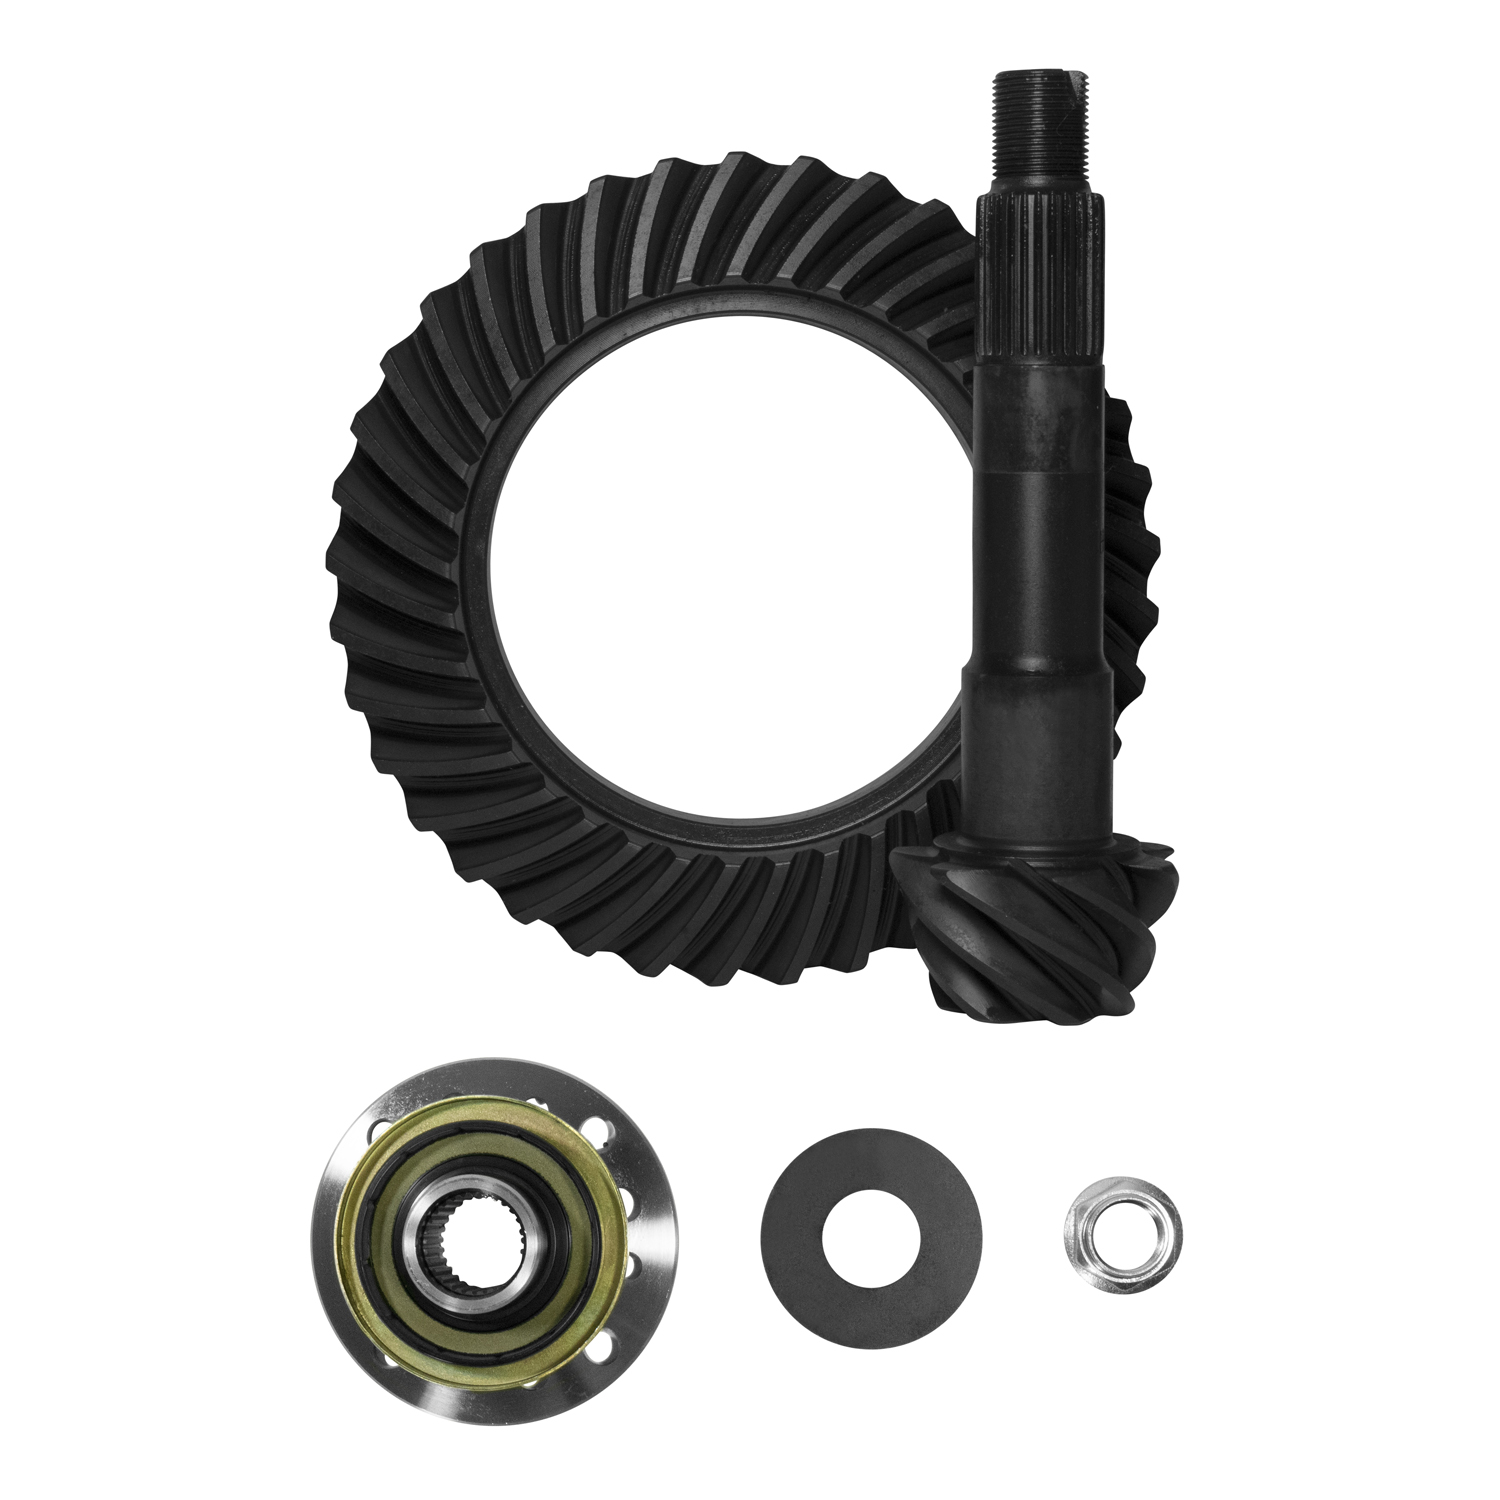 High Performance Ring & Pinion Gear Set For Toyota In A Ratio